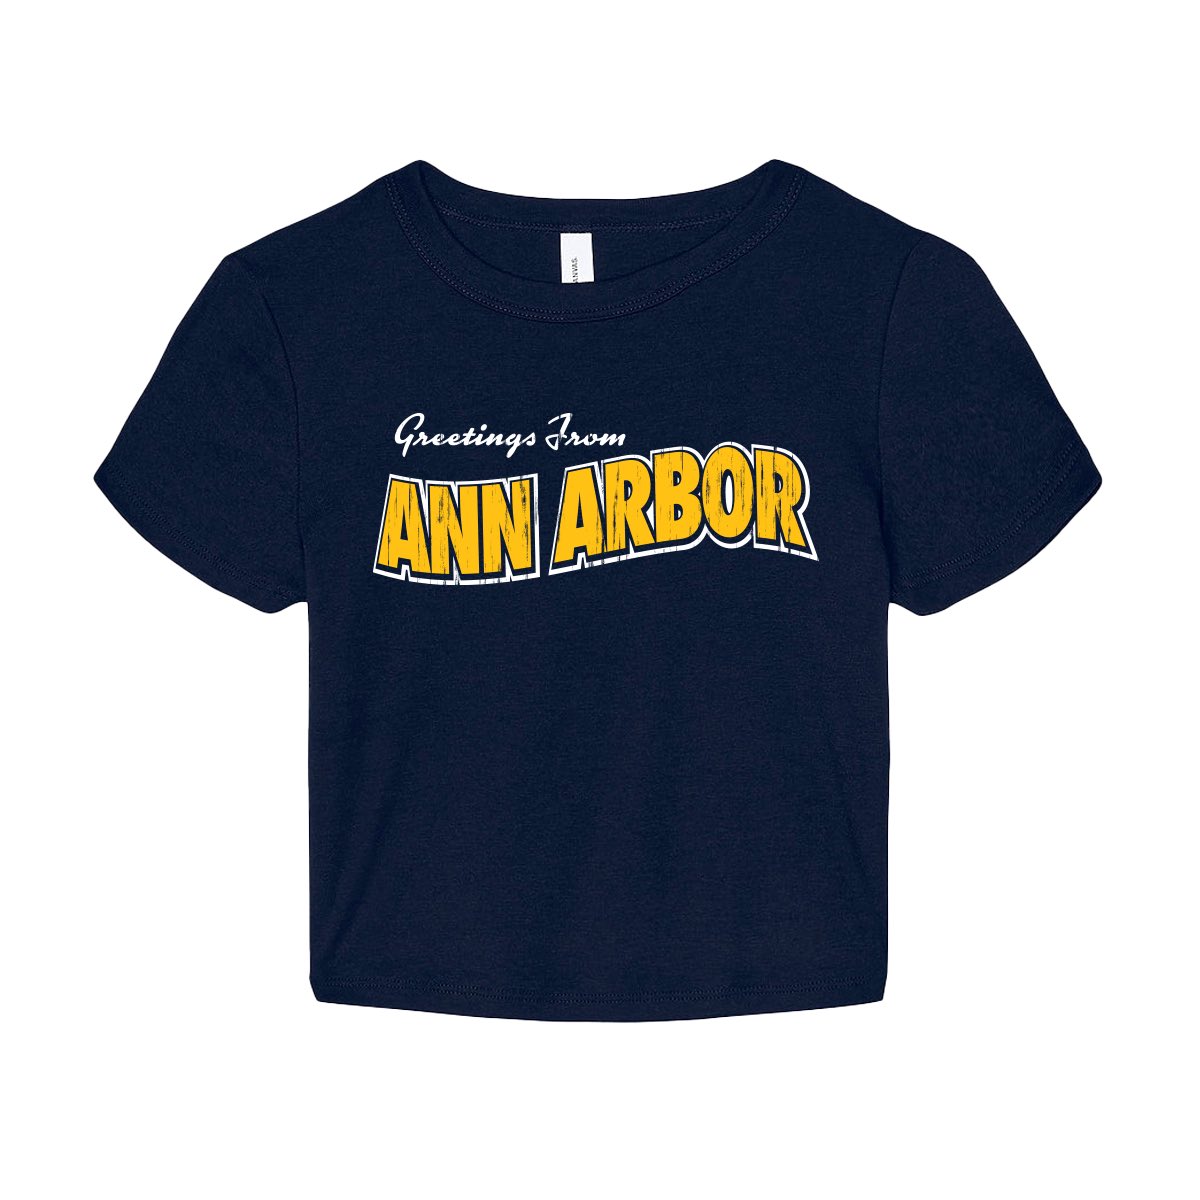 WELCOME BACK CFB 〽️ Check the Barstool Michigan Collection on our website to find new merch drops for the 2023 season! The Boys Tee: bit.ly/3R5z3Mx Welcome to Ann Arbor Crop: bit.ly/3Z2LZVh